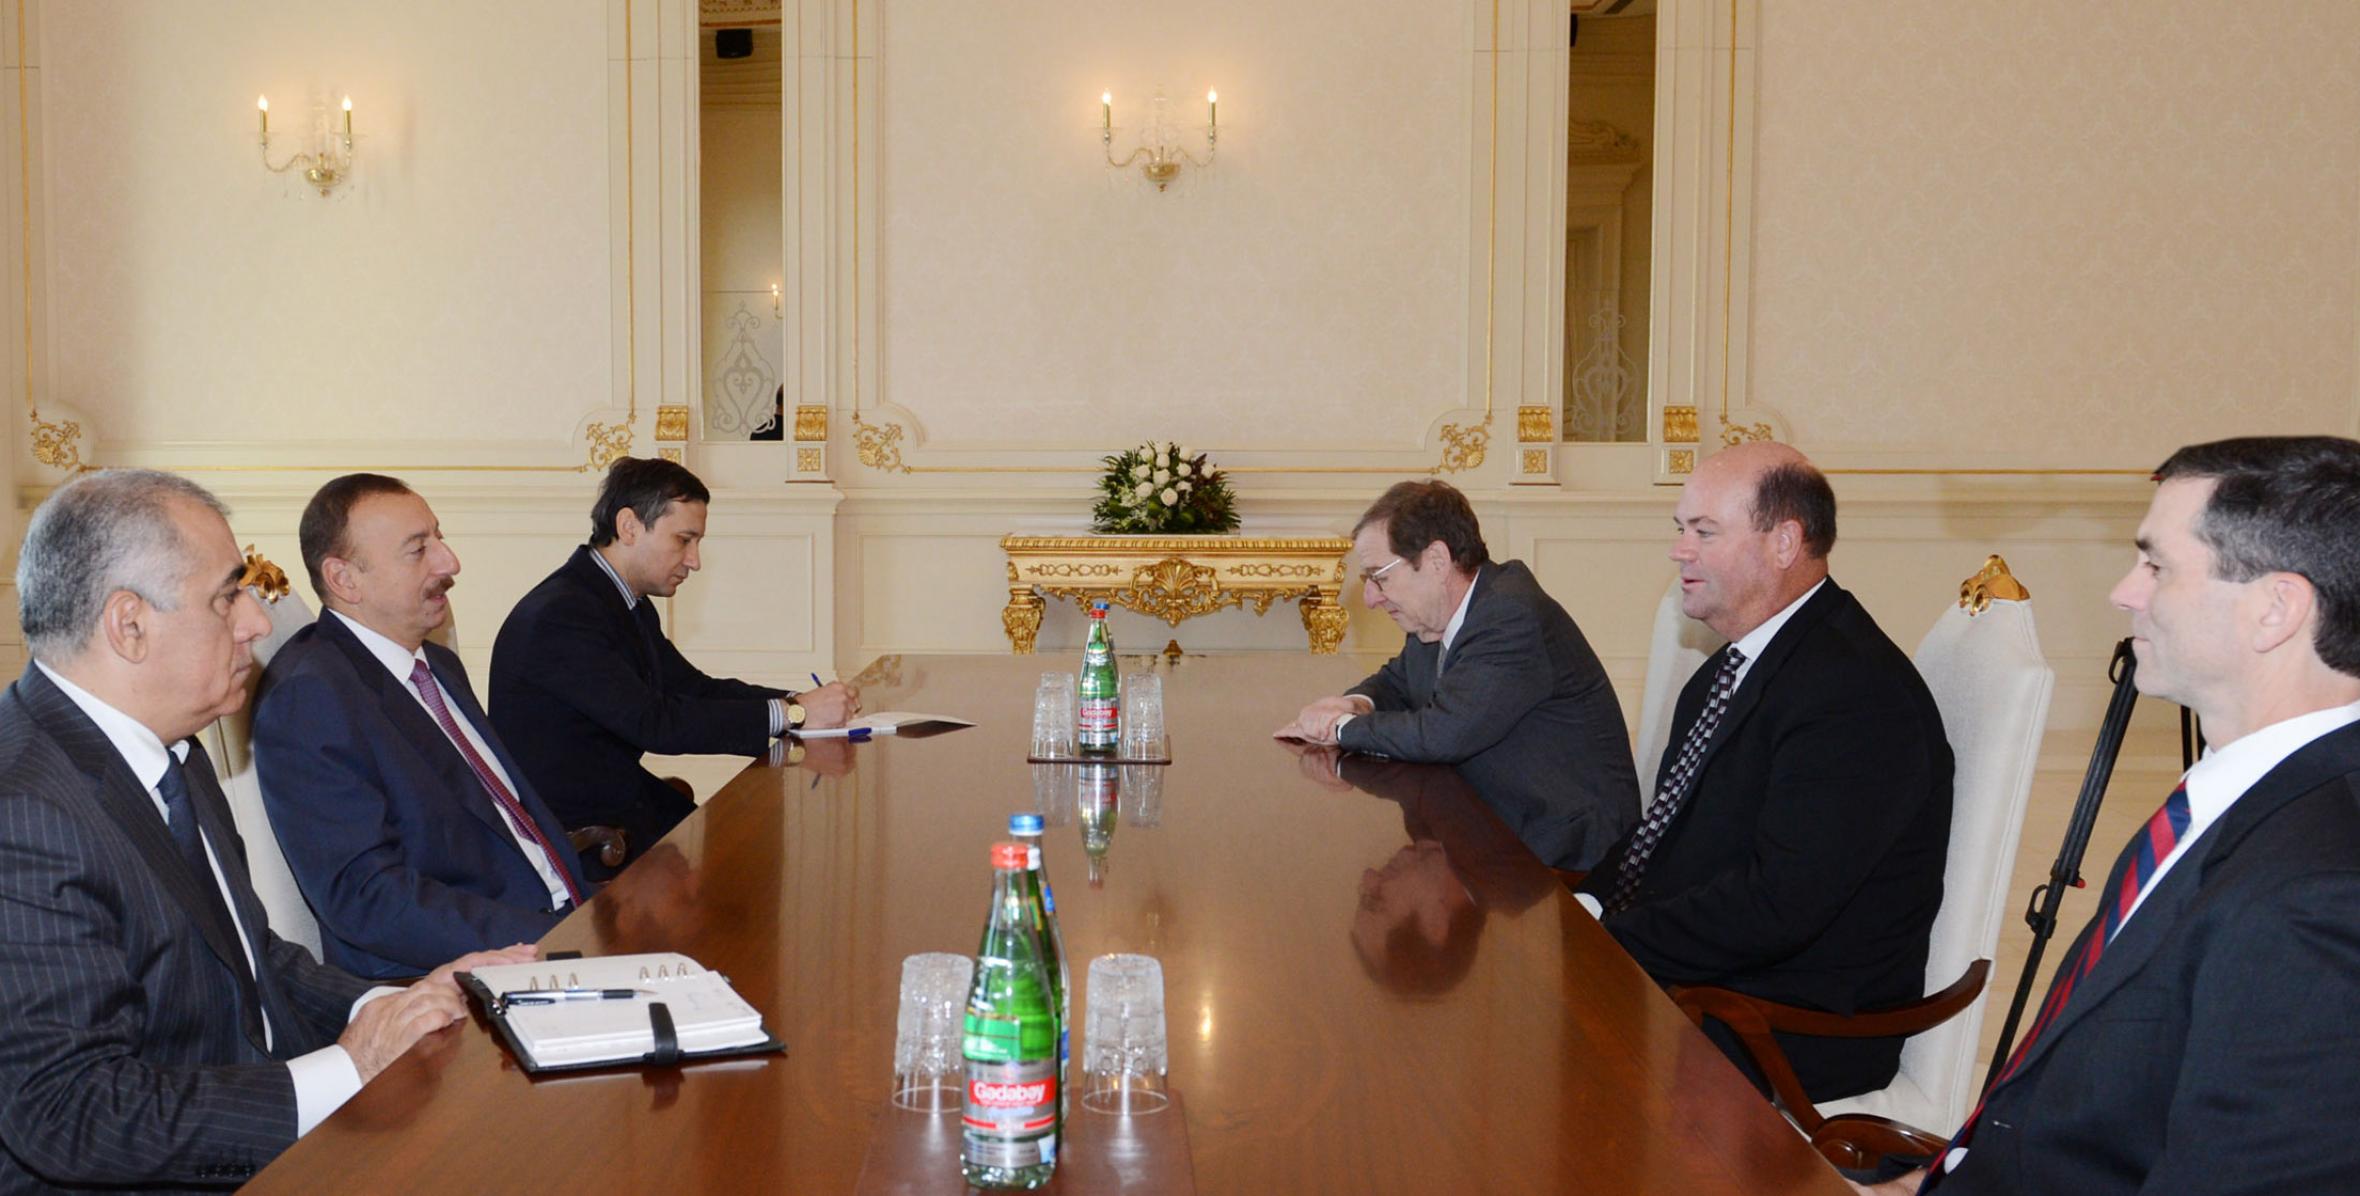 Ilham Aliyev received the delegation led by the CEO of ConocoPhillips